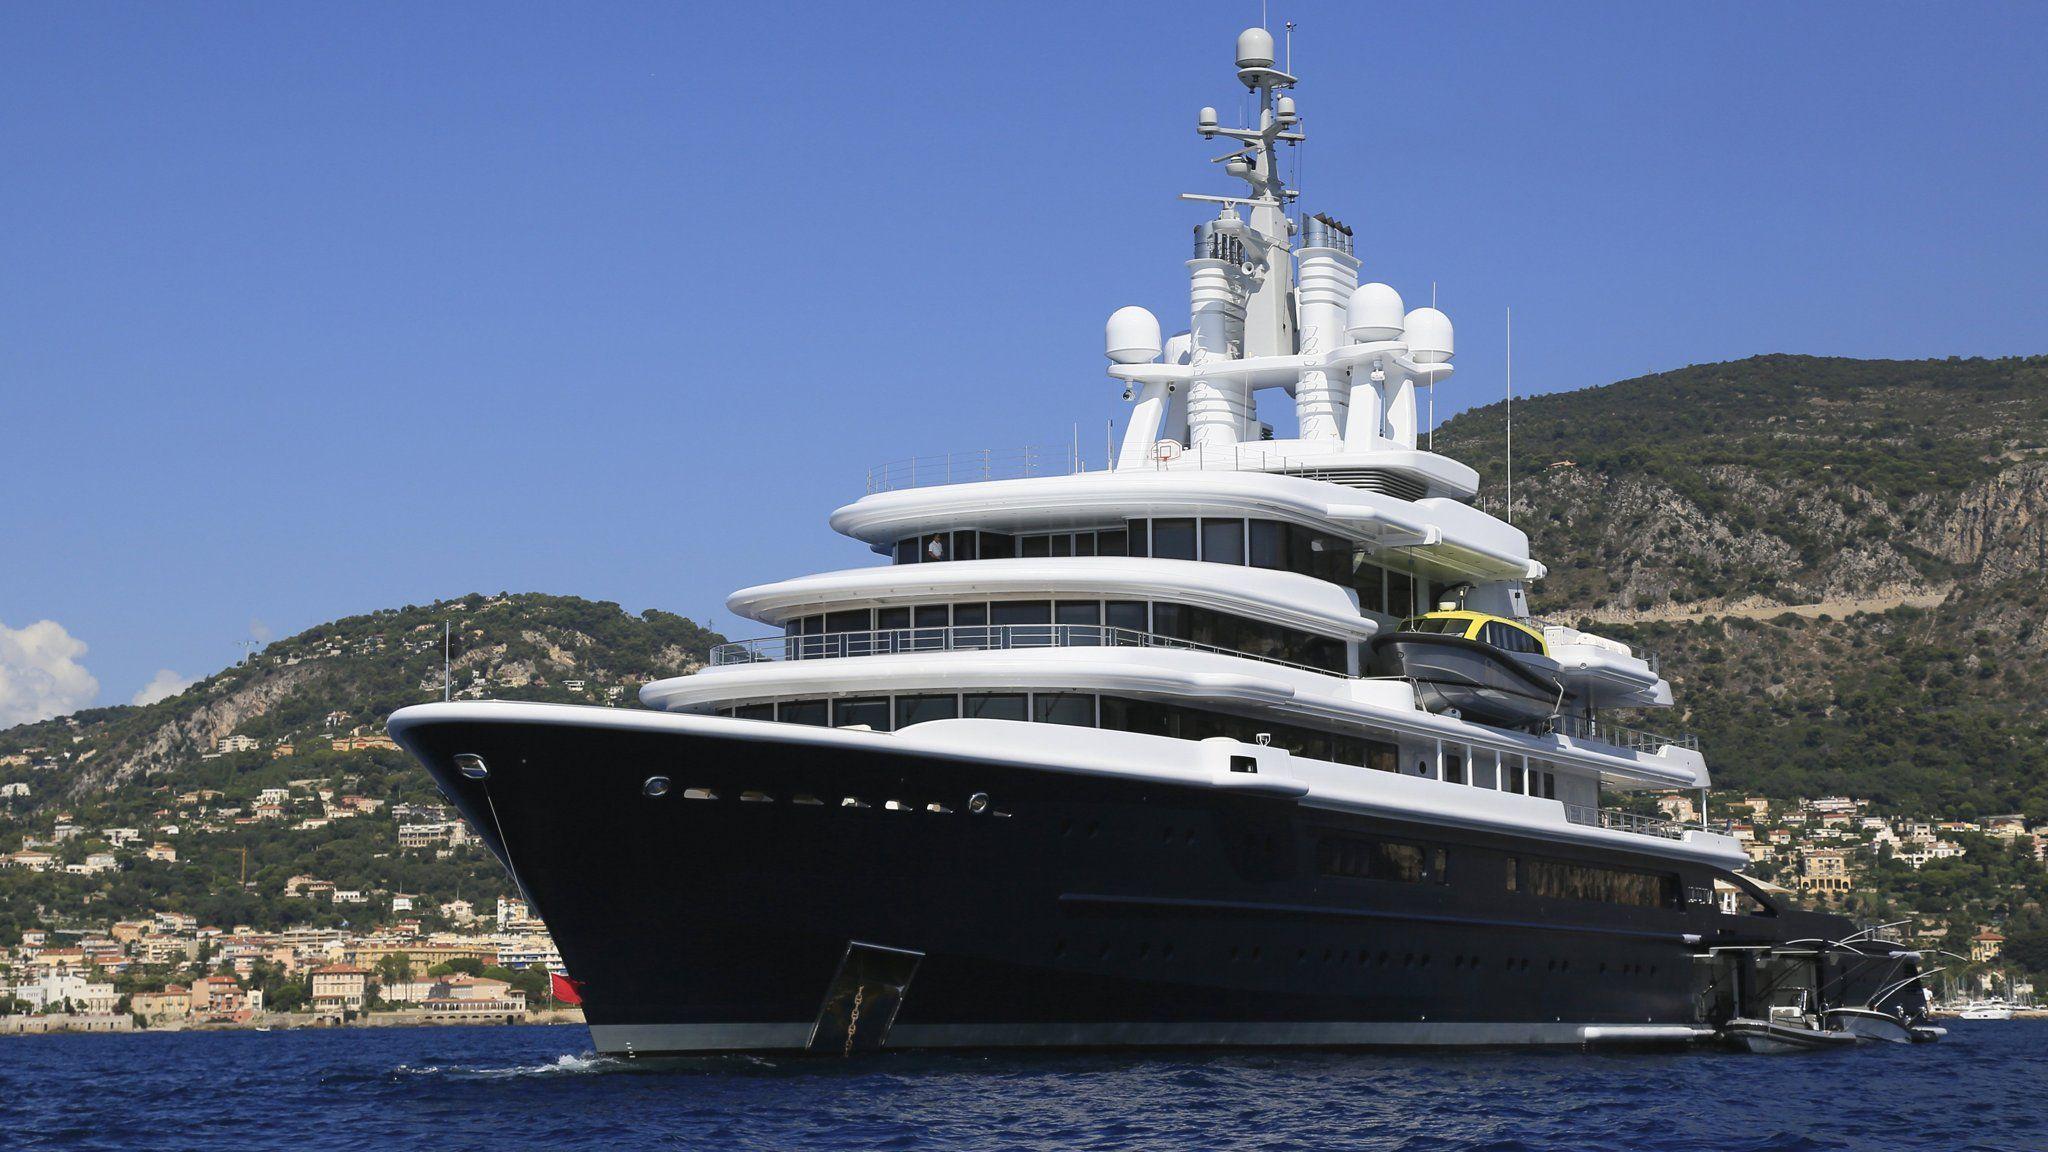 Russian billionaire's superyacht given to former wife in divorce